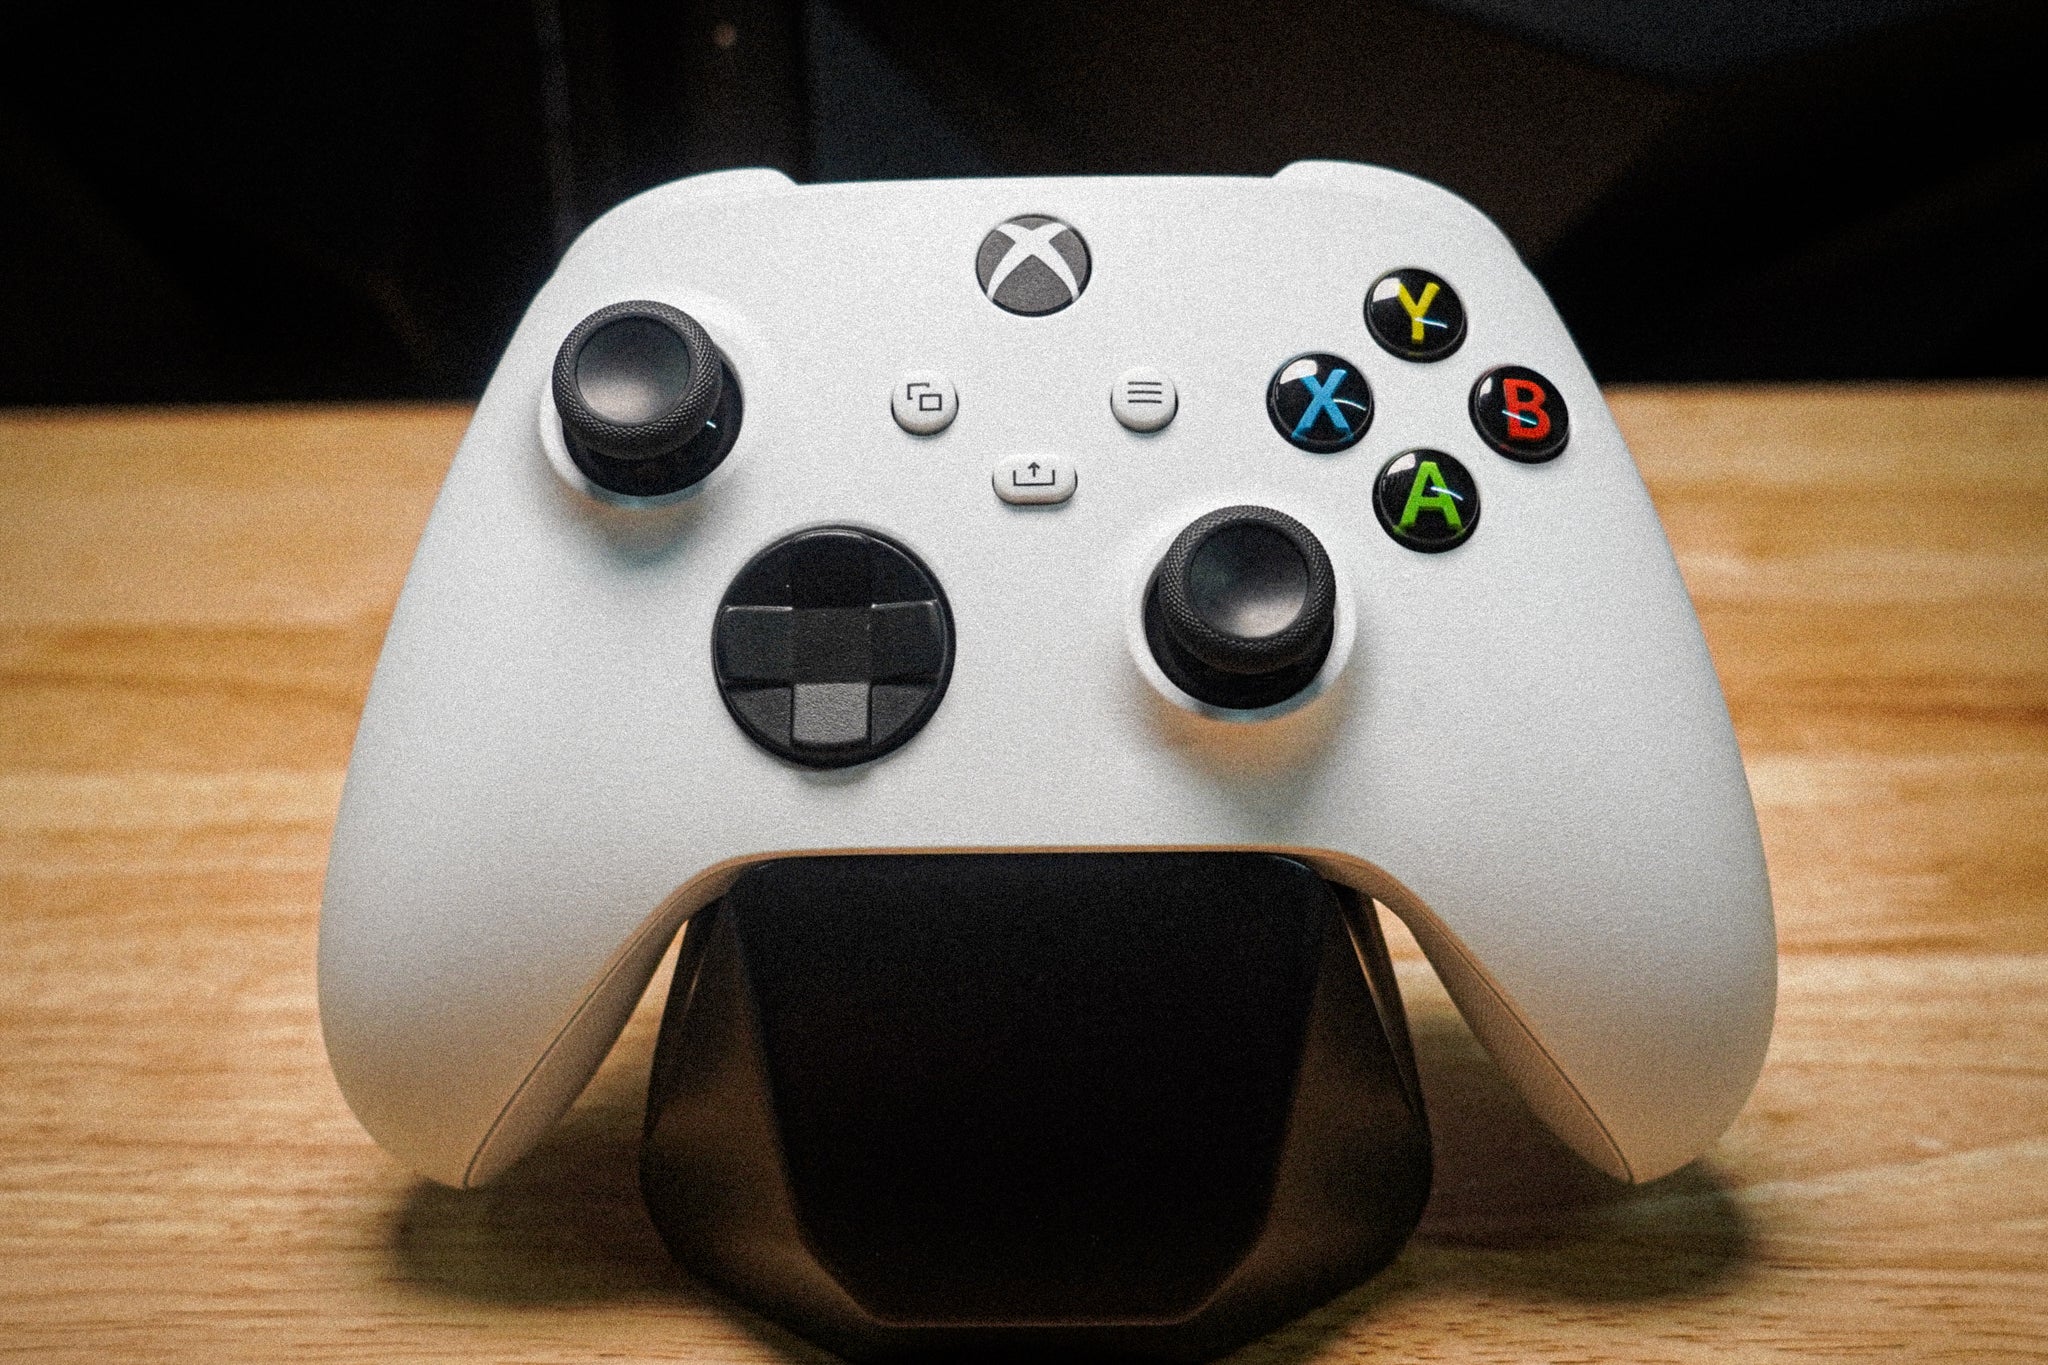 24 Hour White Tactical Cinch Xbox (4 Buttons) - Cinch Gaming